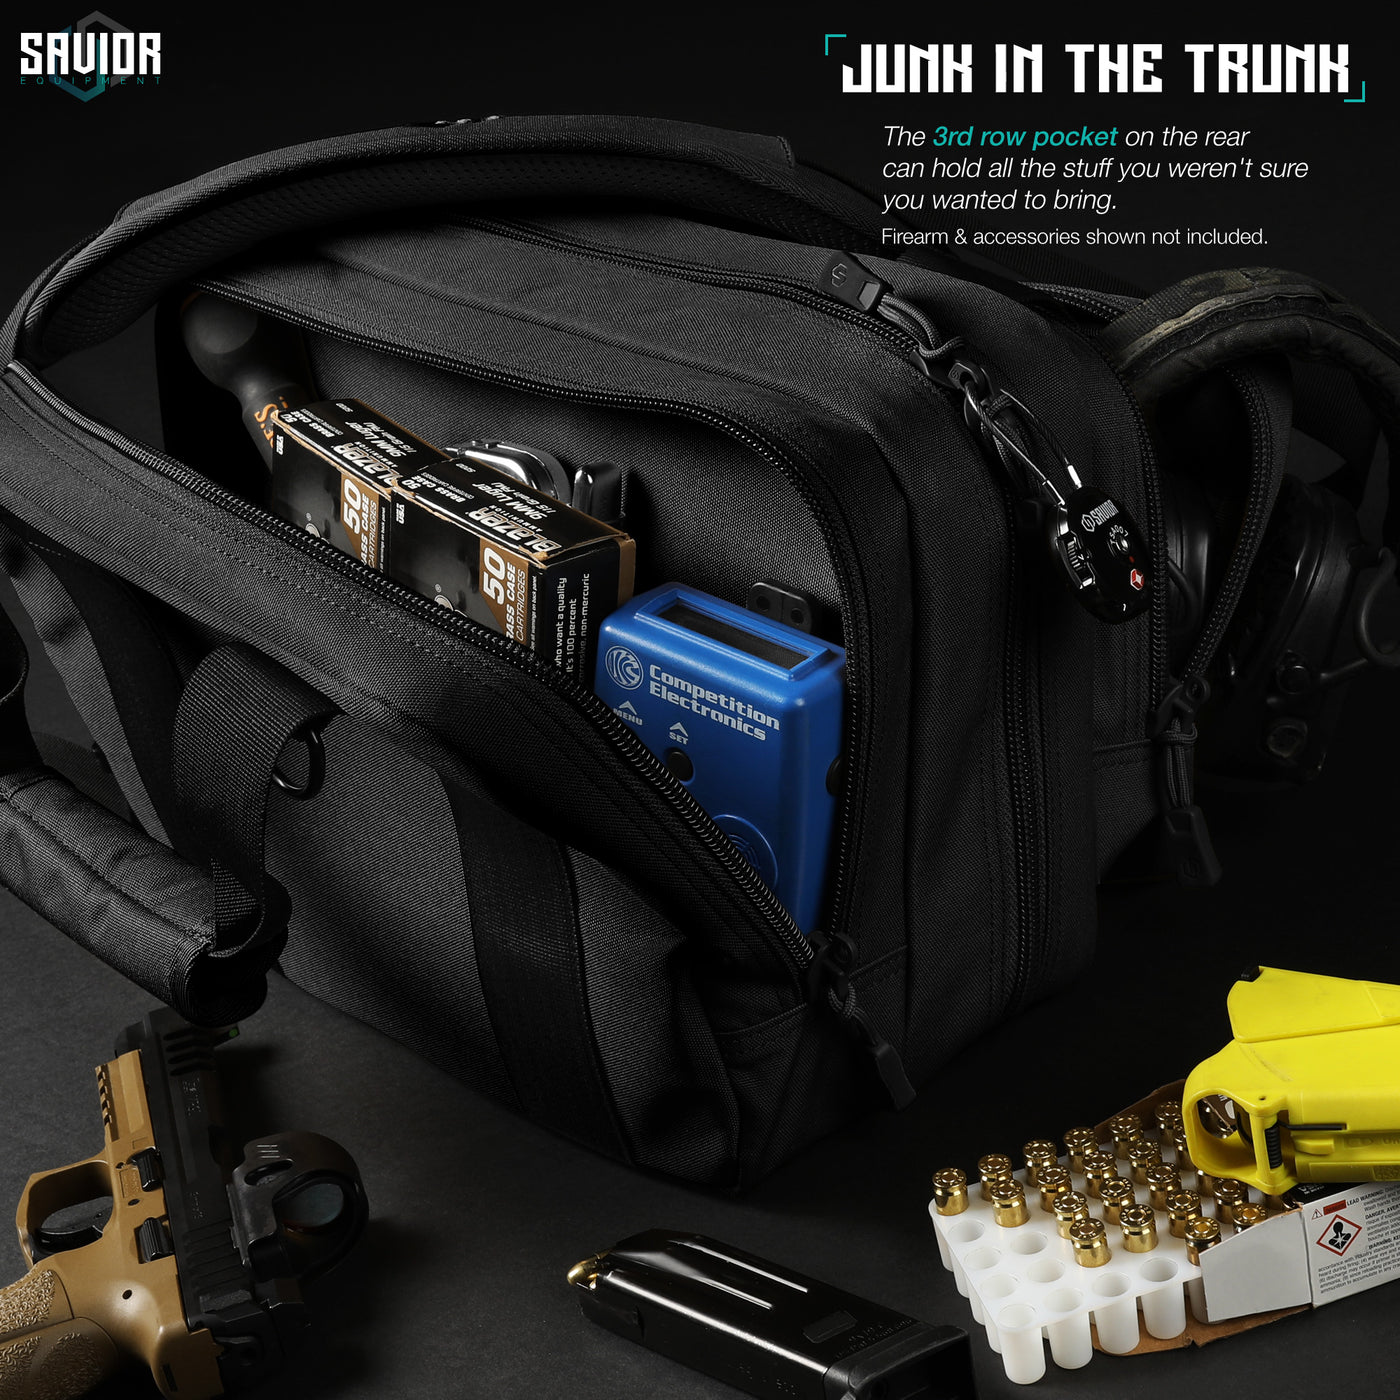 Junk In The Trunk - The 3rd row pocket on the rear can hold all the stuff you weren’t sure you wanted to bring. Firearms & accessories shown not included.